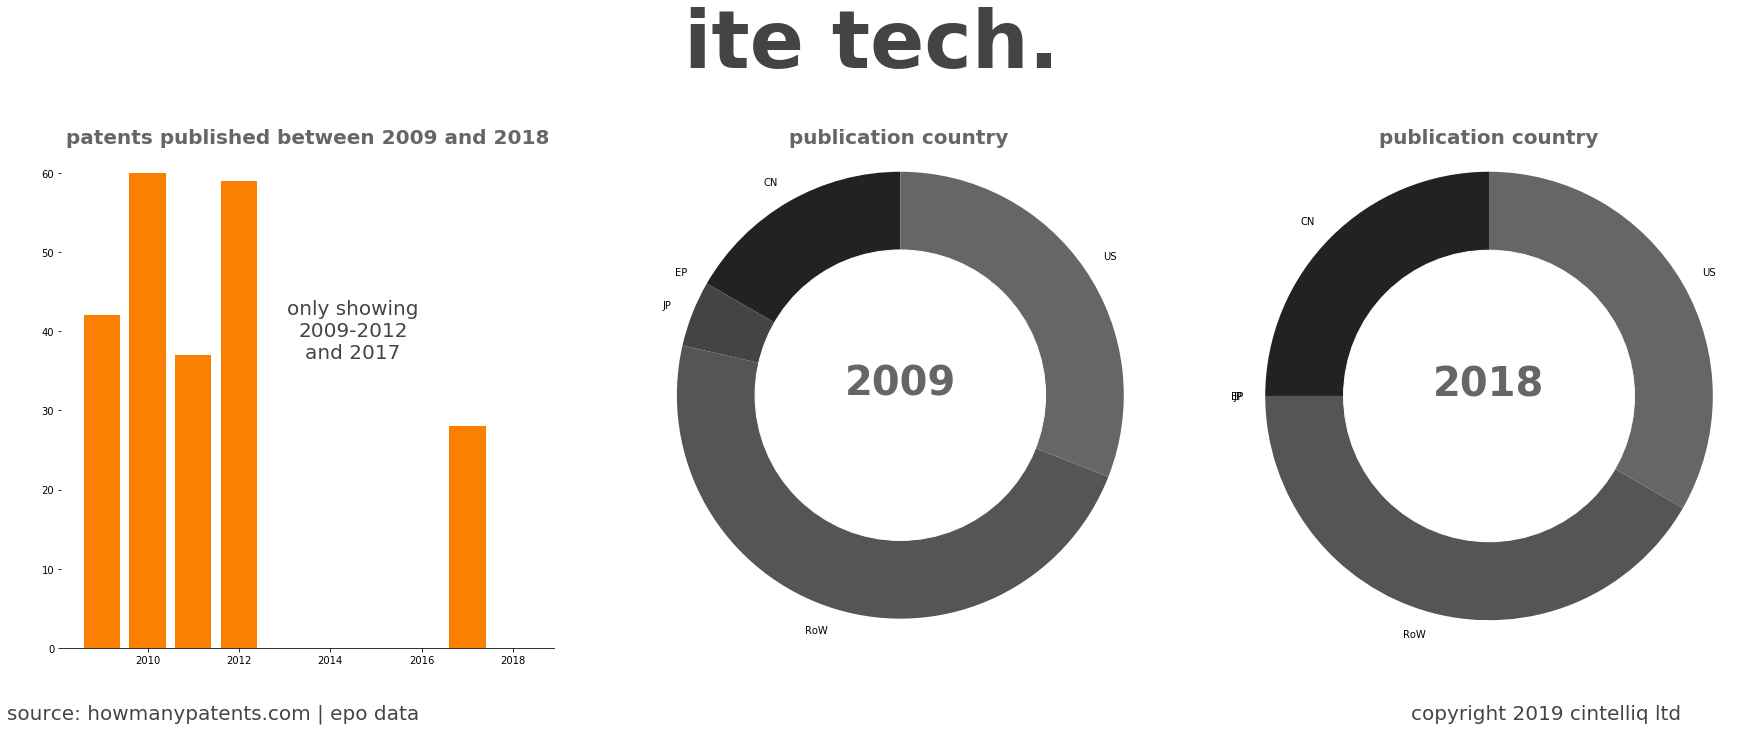 summary of patents for Ite Tech.